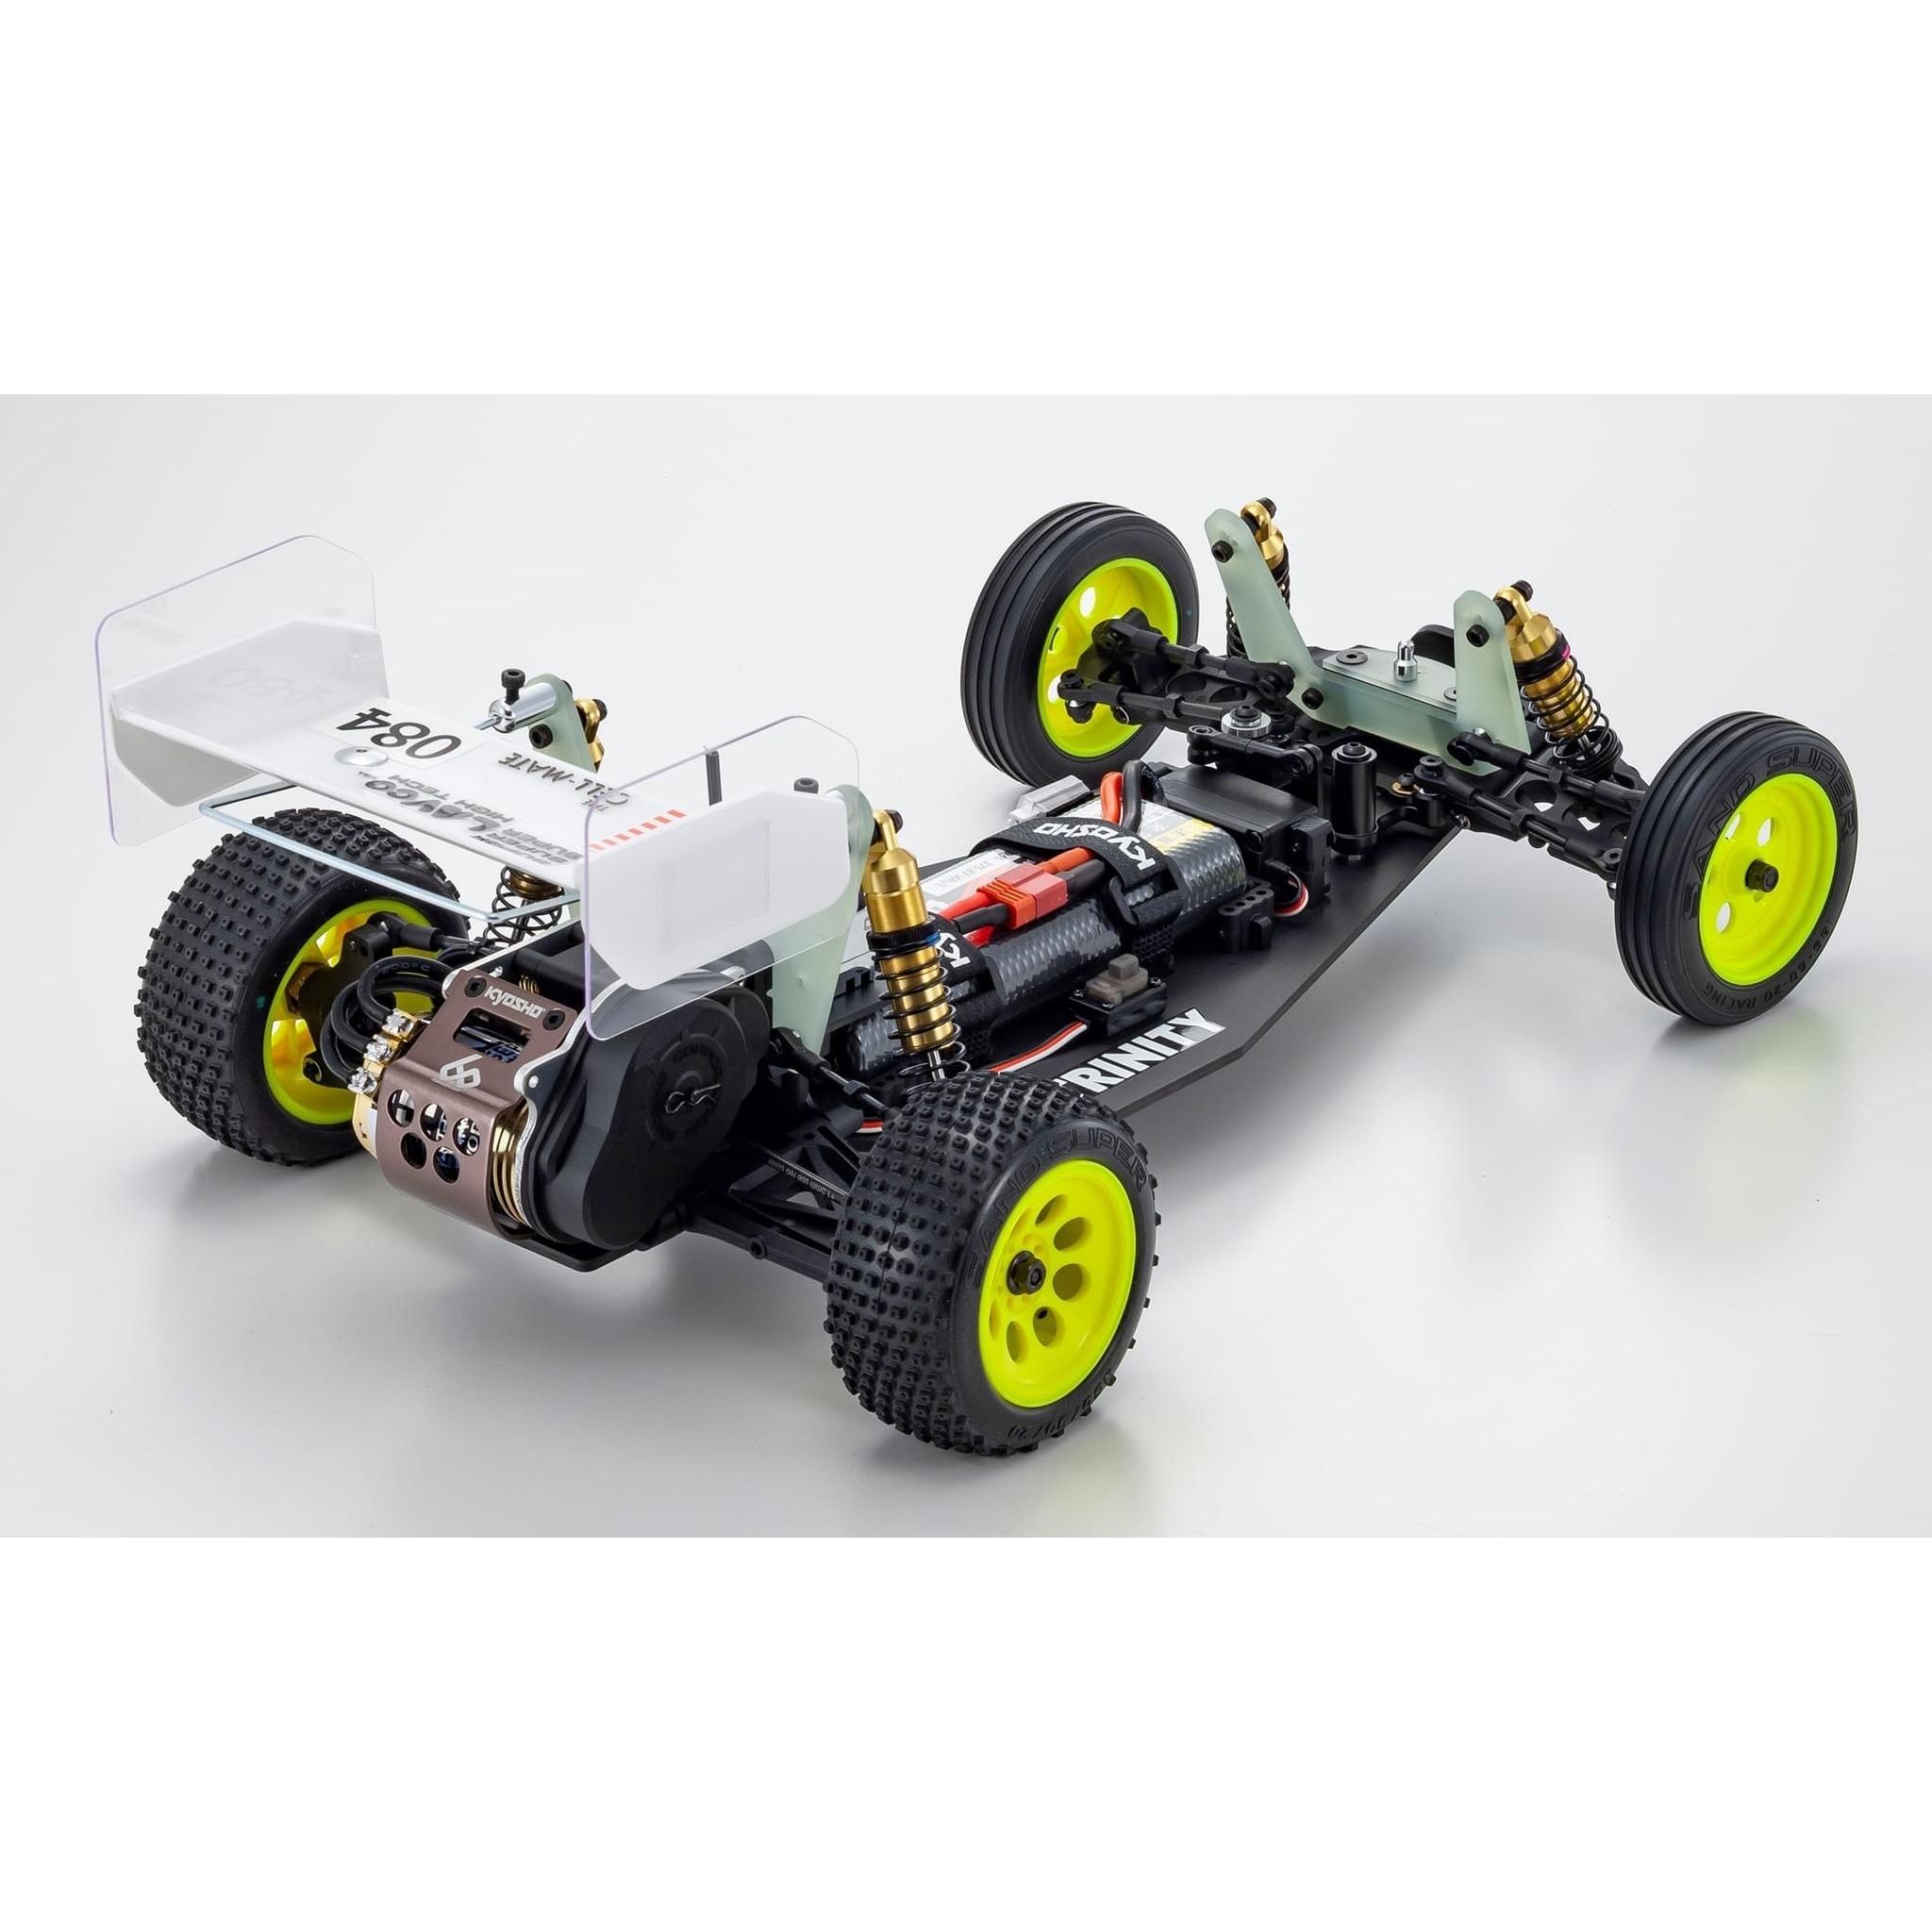 Kyosho Mini-Z 20th Anniversary Chassis Kit - Small-Scale RC